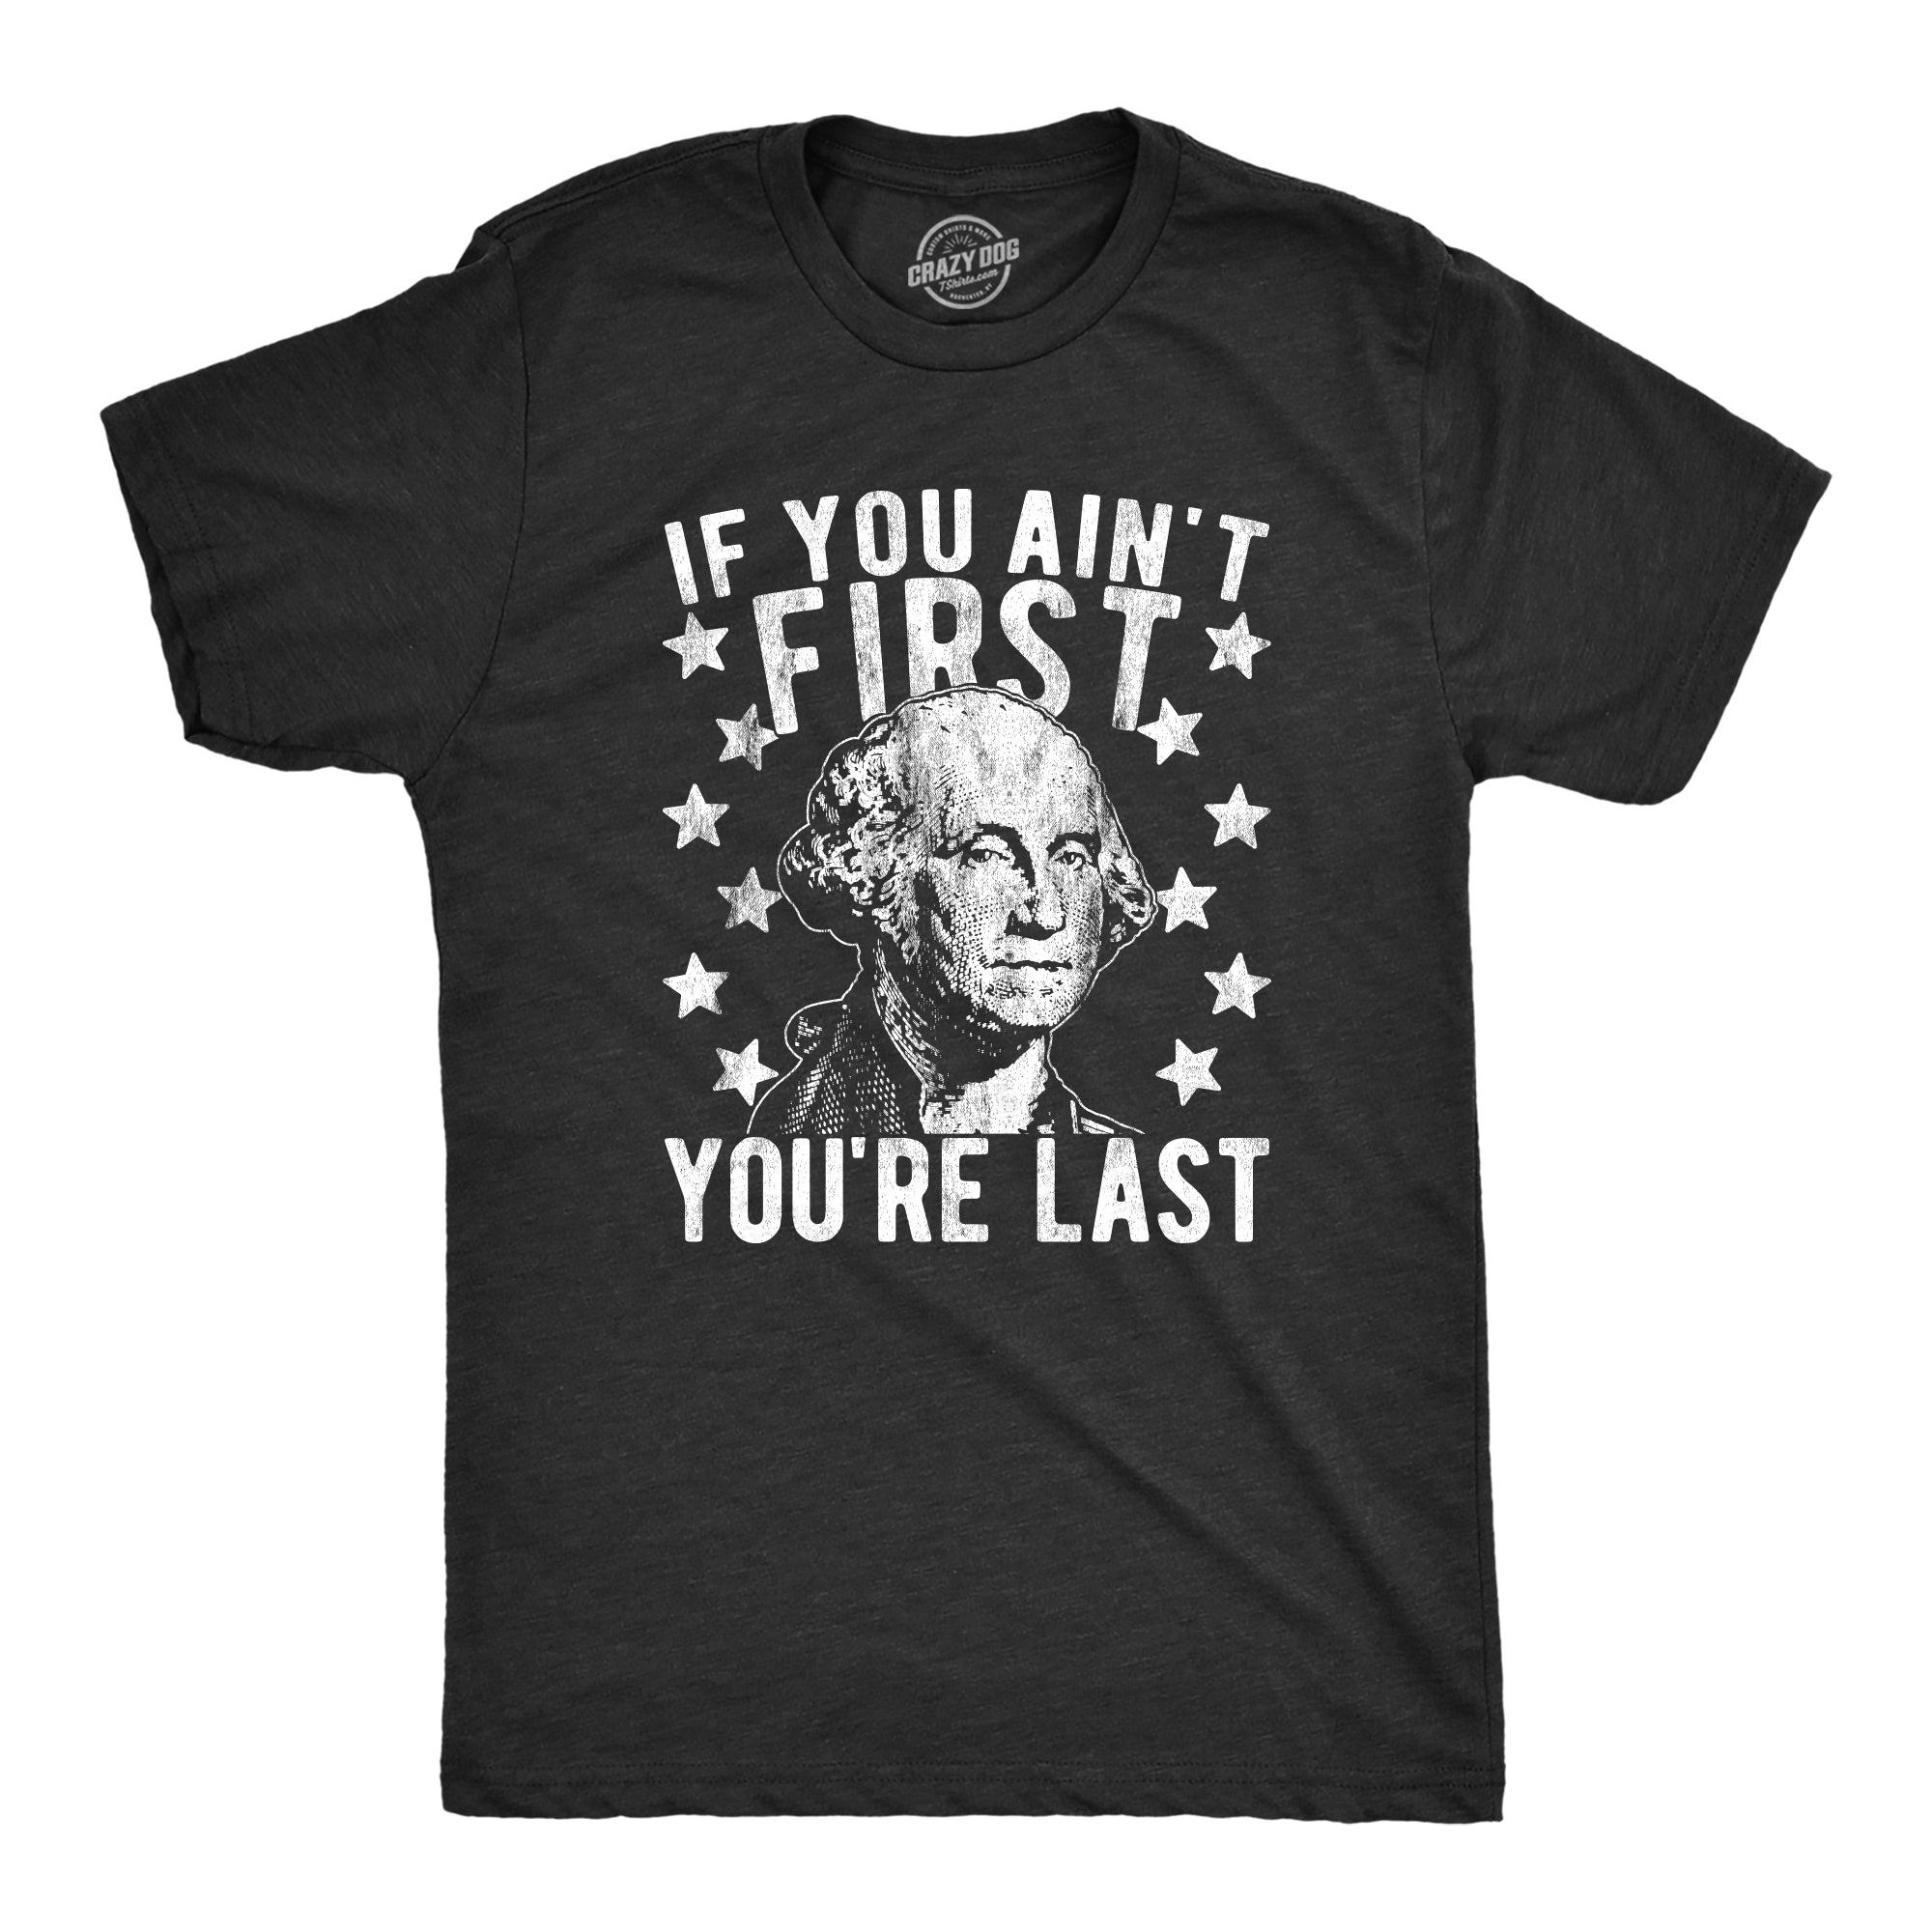 Funny Heather Black - Washington First If You Ain't First You're Last Mens T Shirt Nerdy Fourth of July political Tee